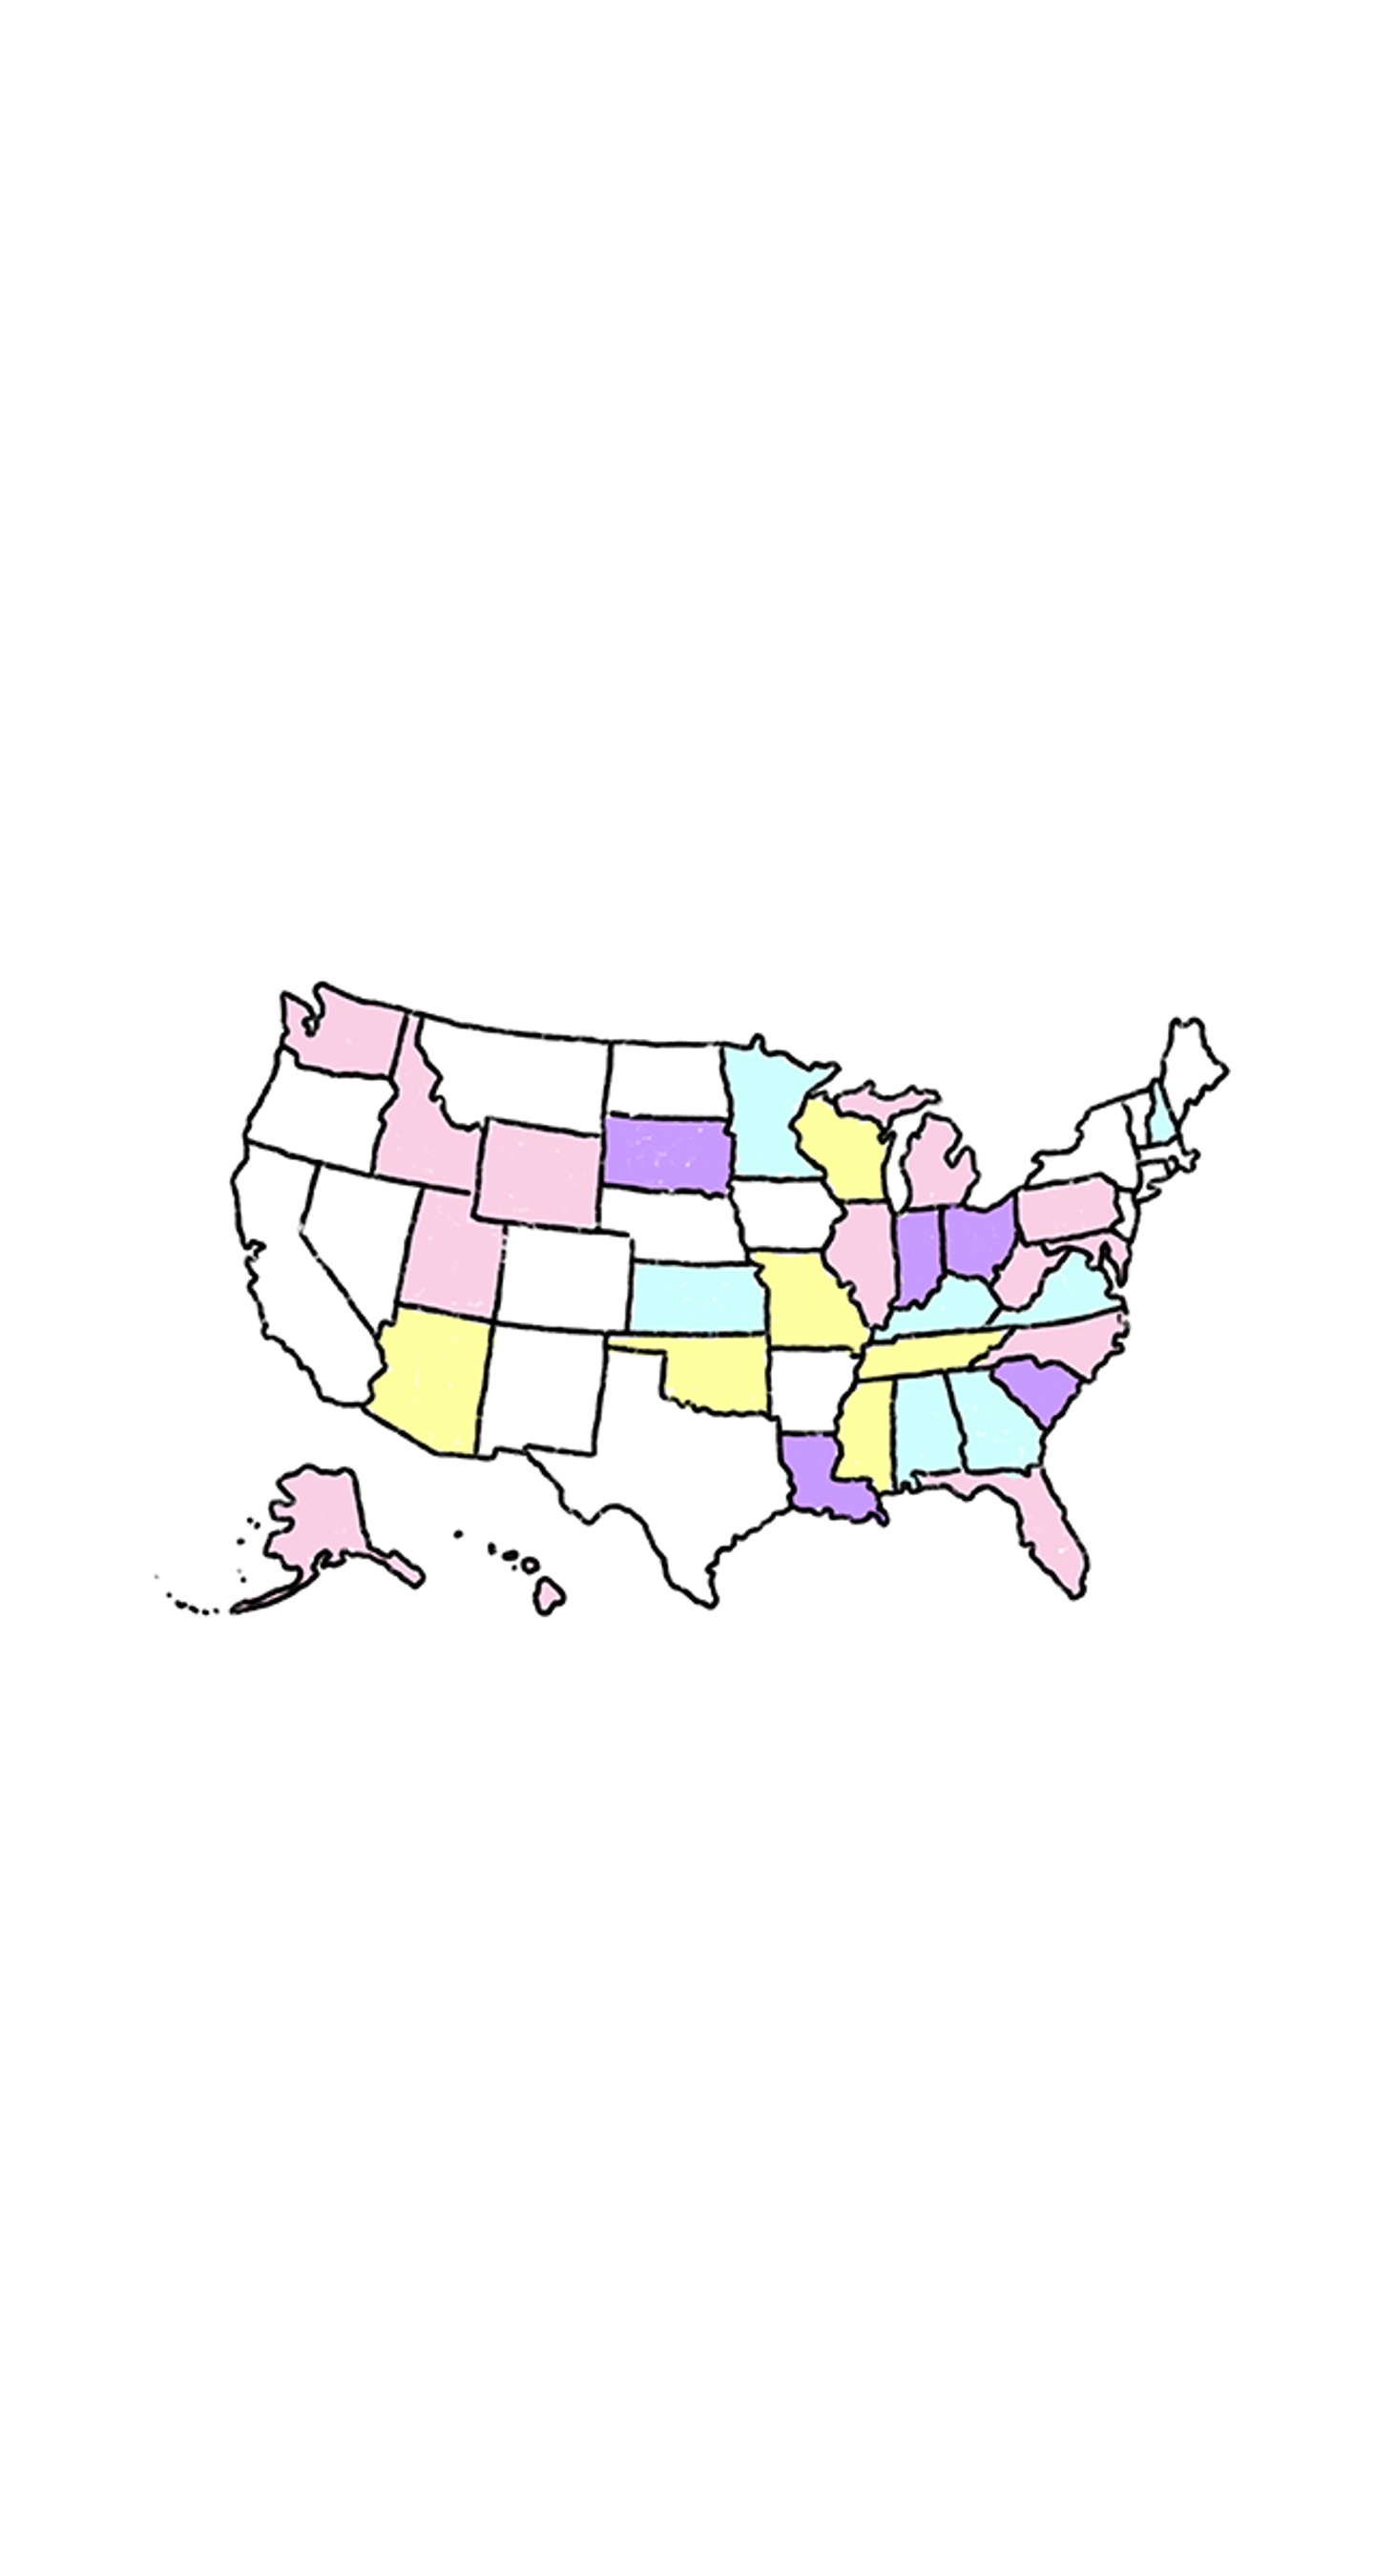 a map of the united states depicting anti-transgender bans state-by-state